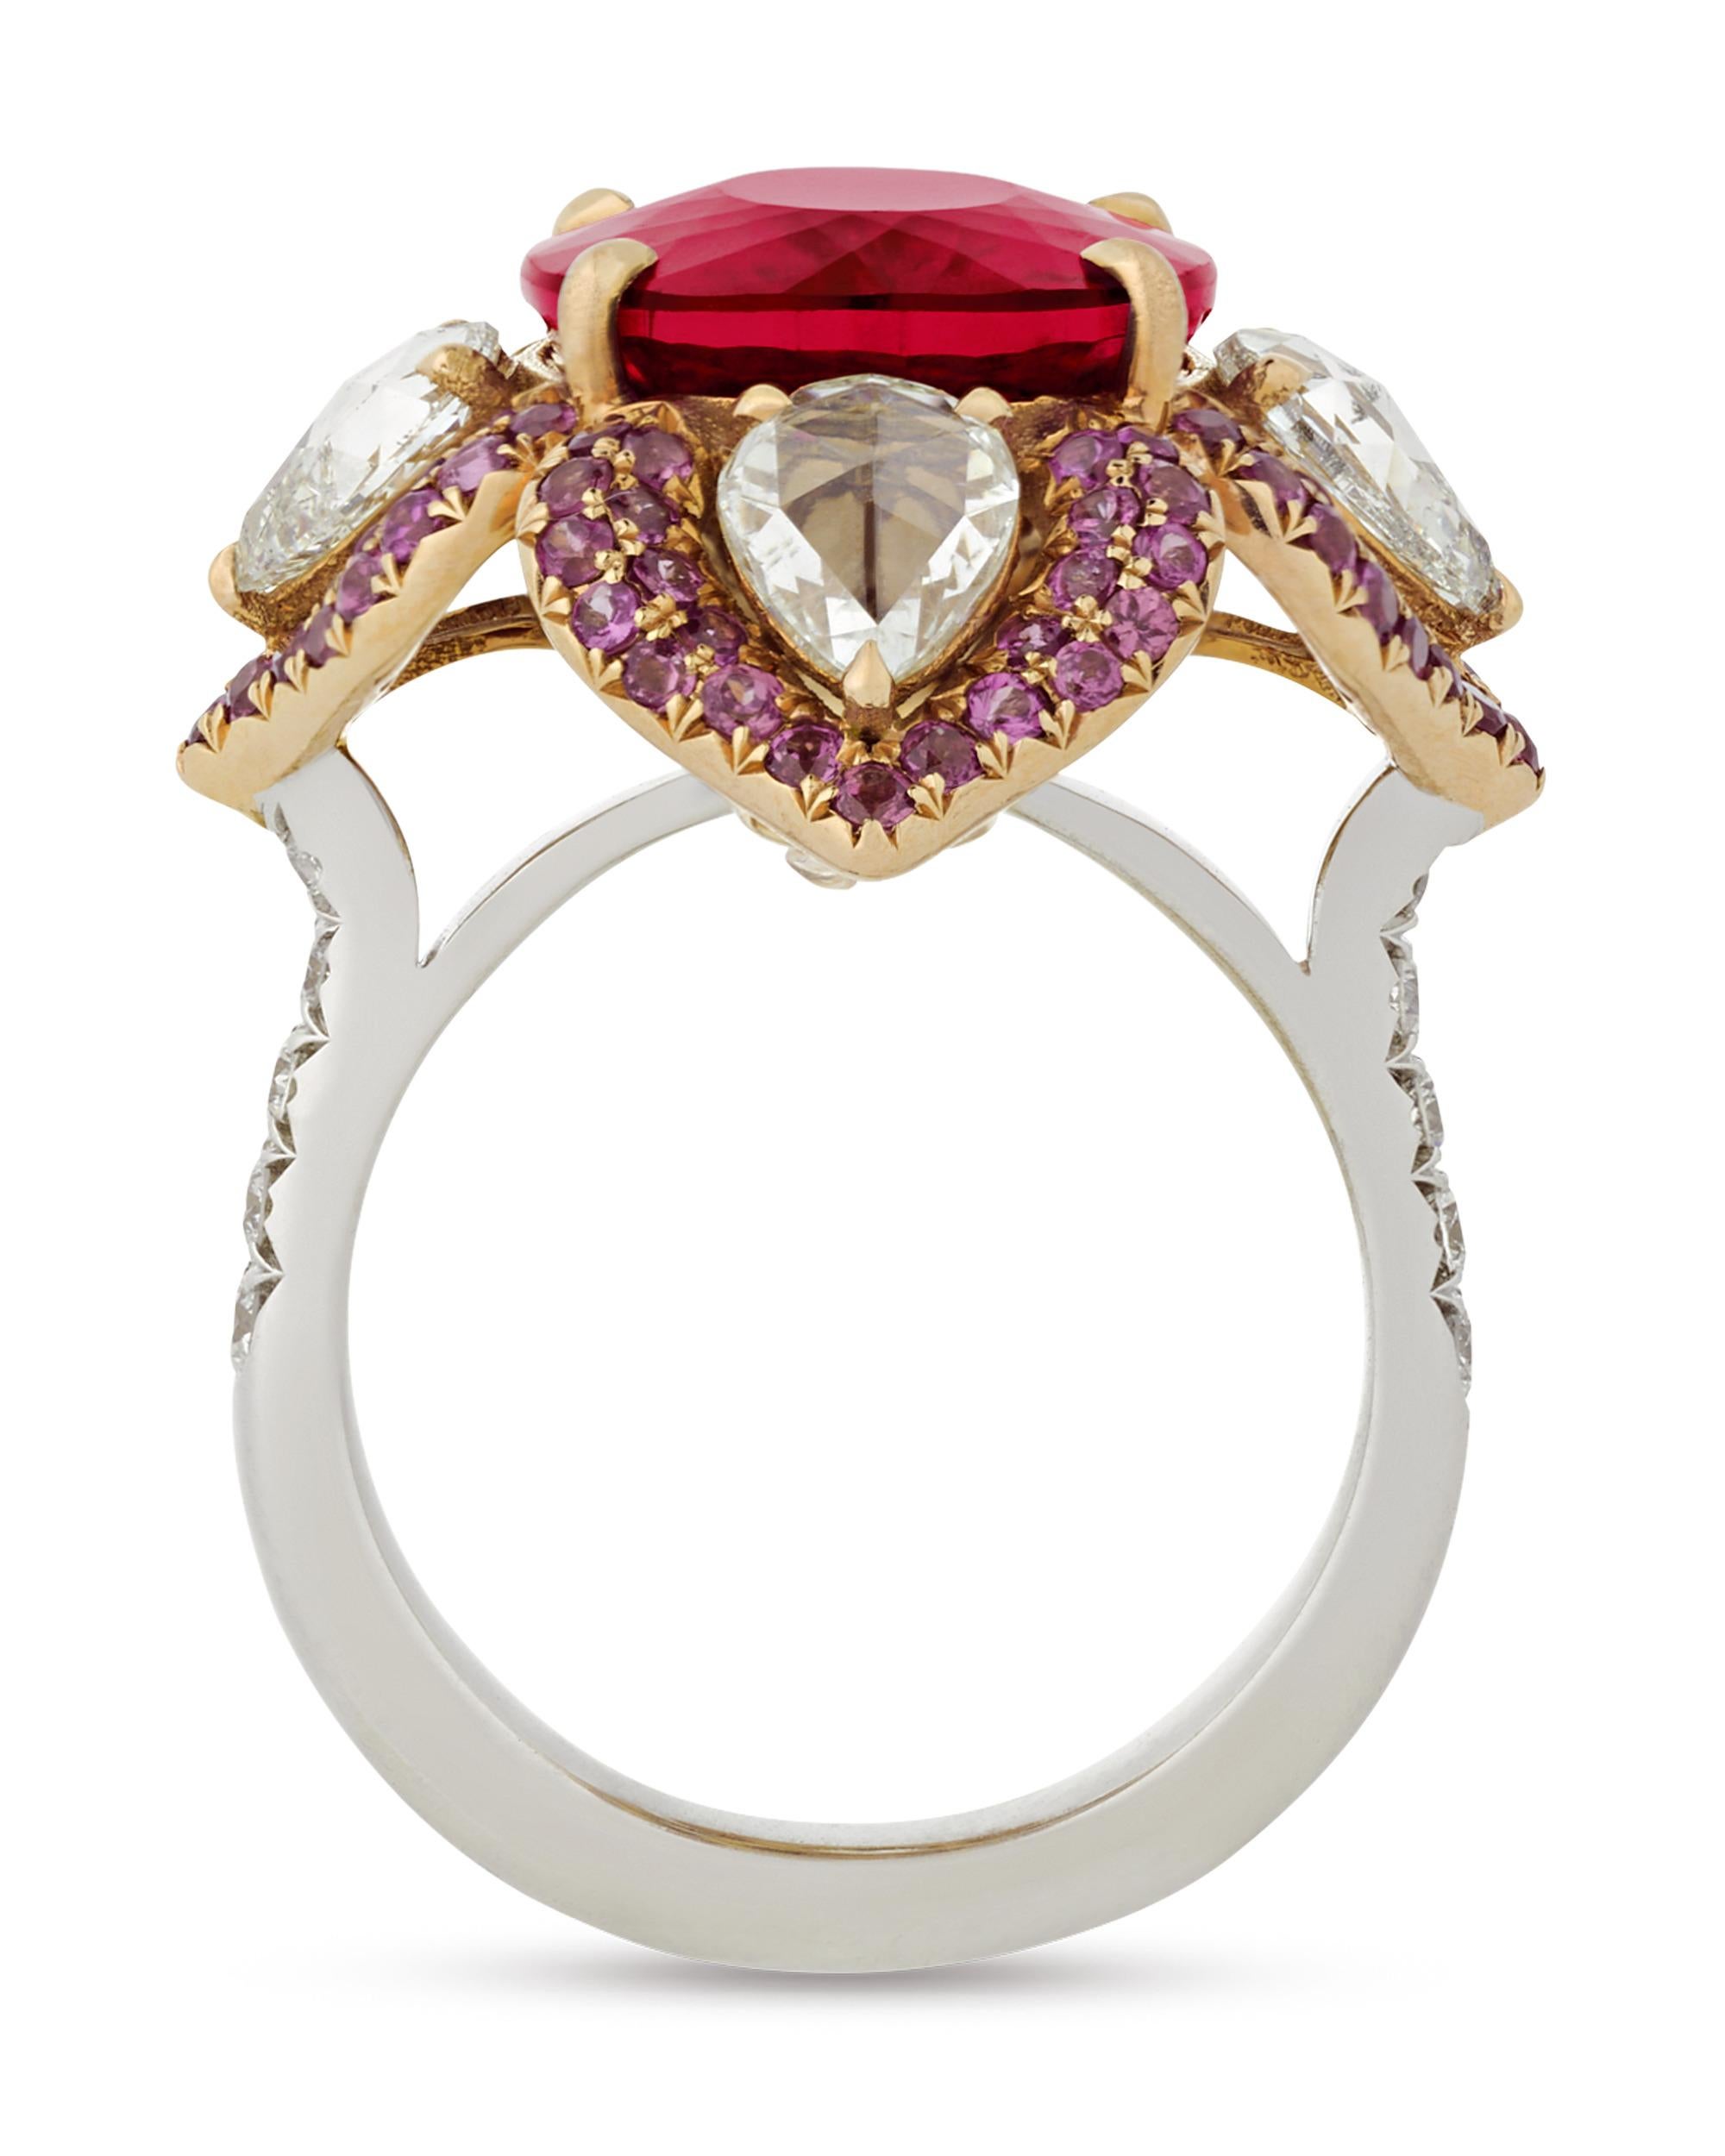 Modern Floral Rubellite Tourmaline Ring, 9.41 Carats For Sale